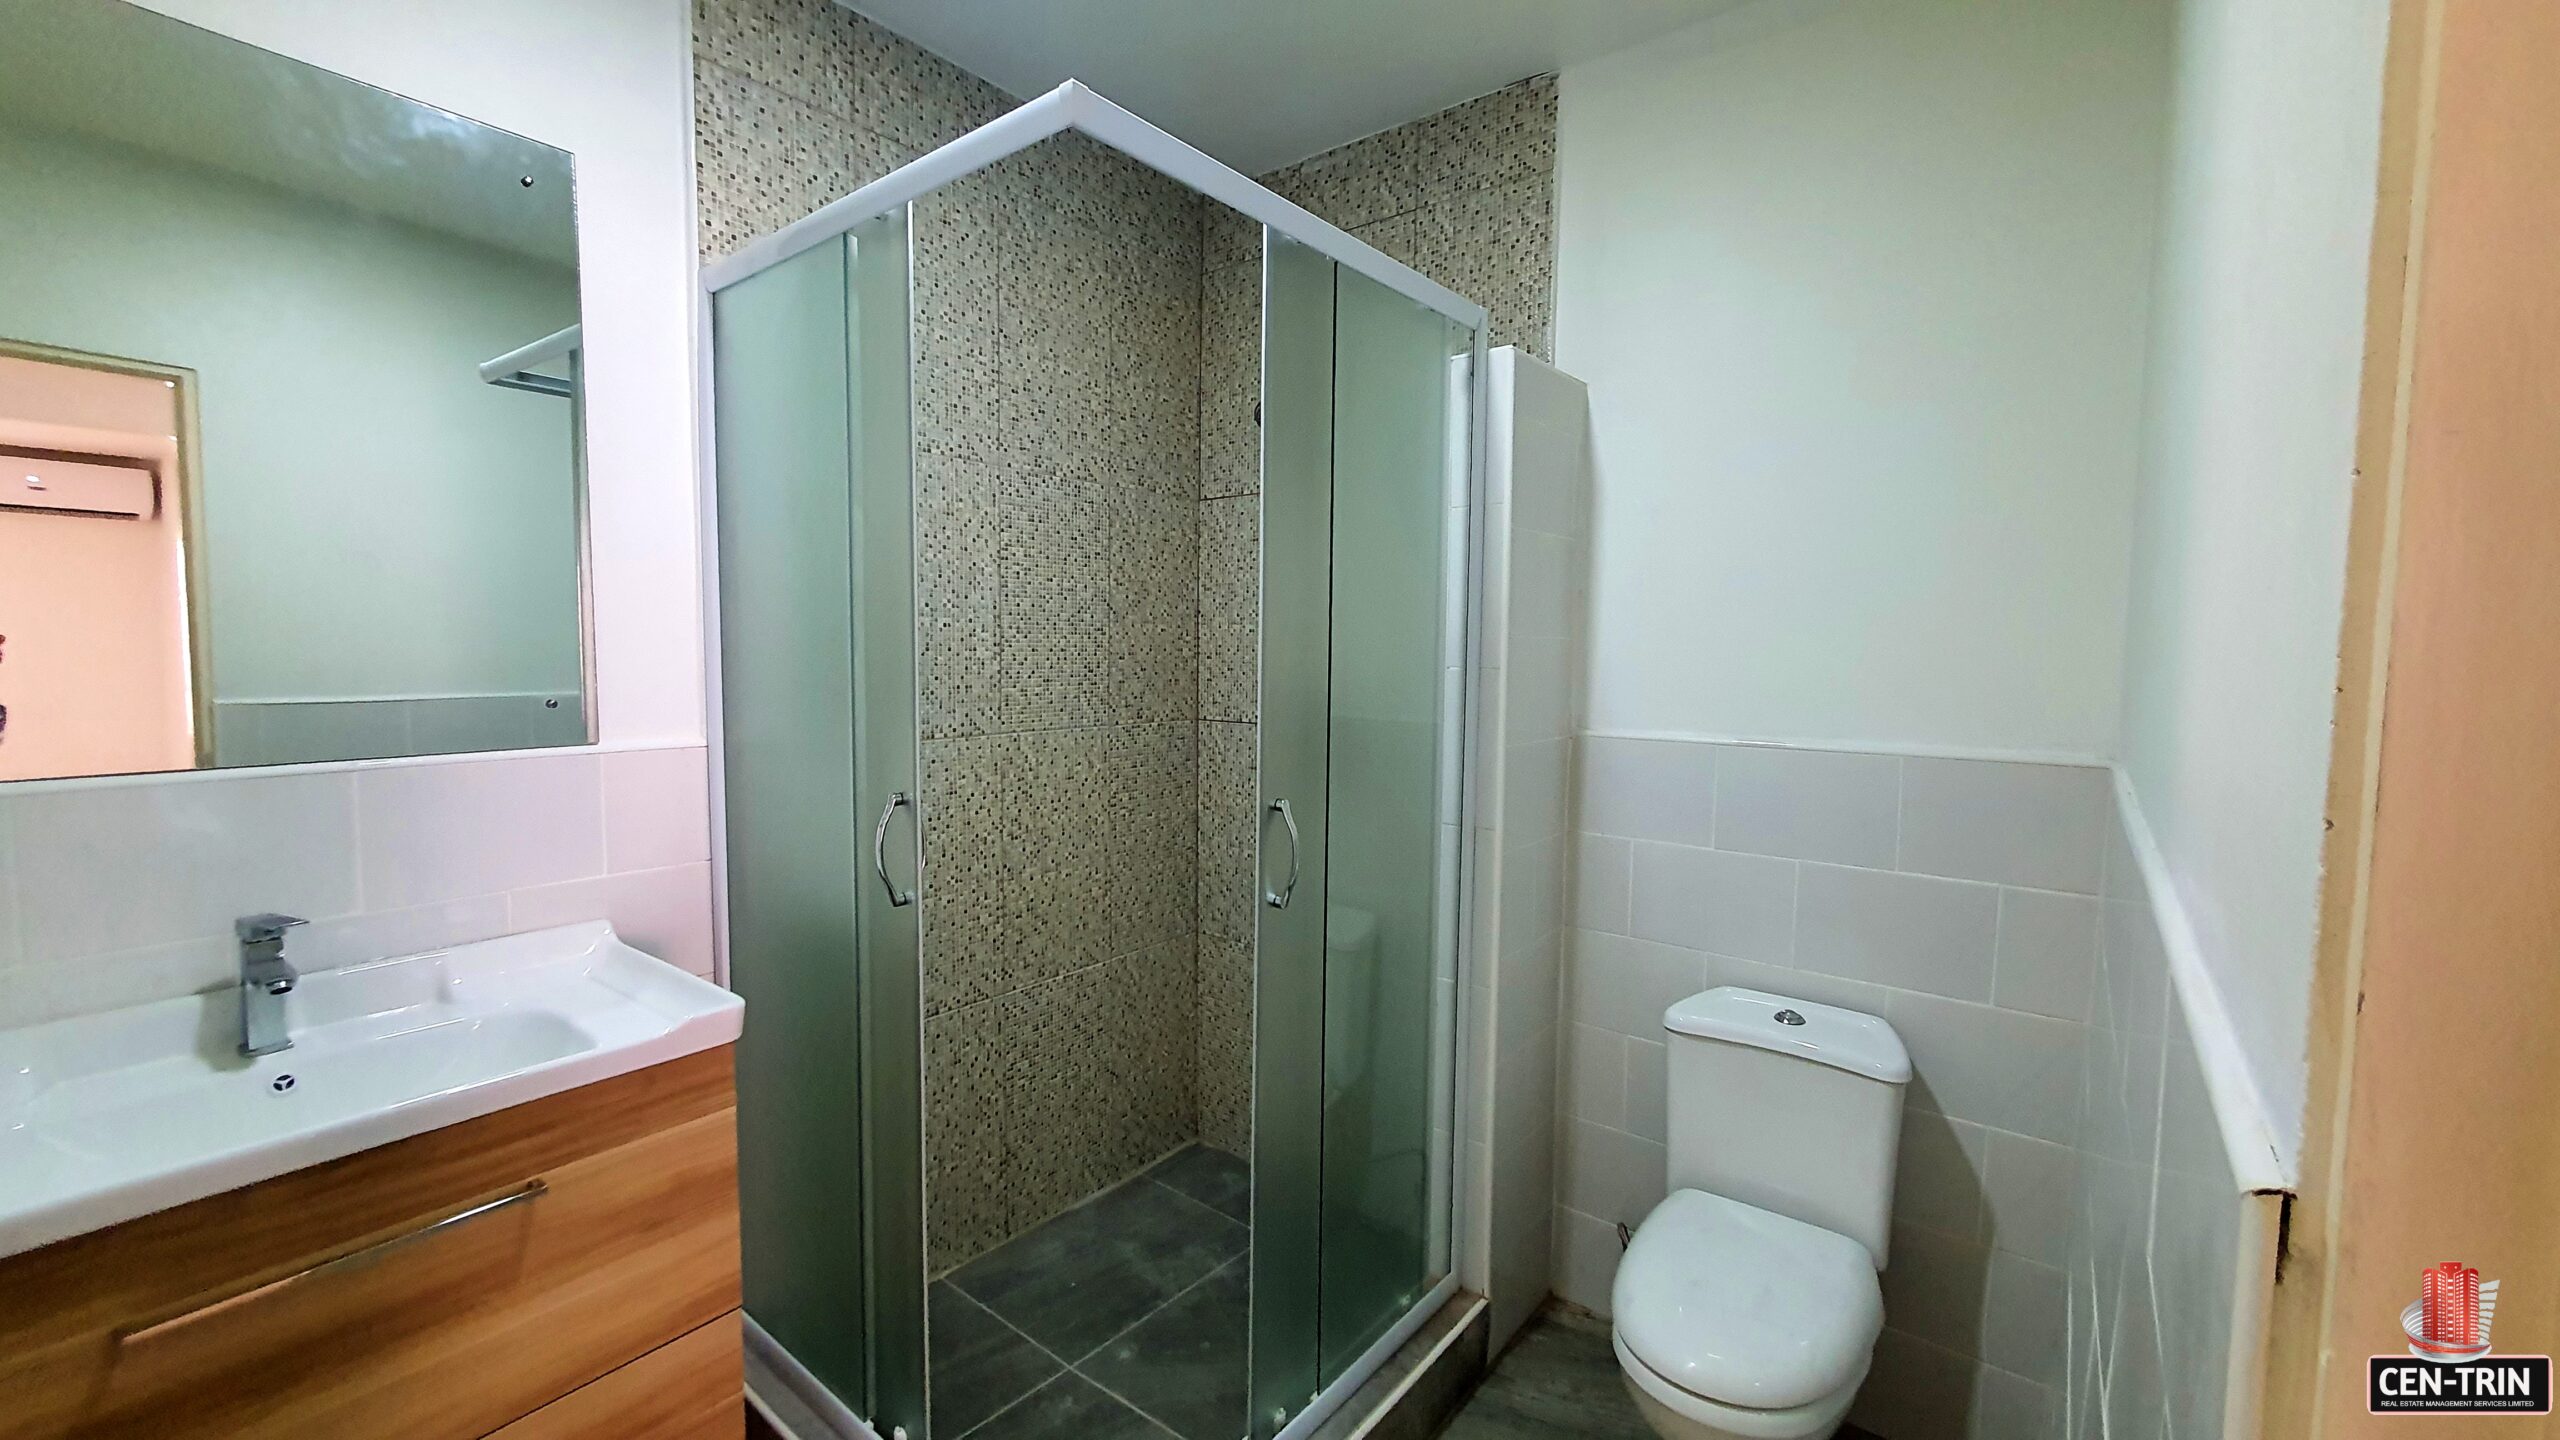 Shower with a glass enclosure, stainless steel showerhead, and tile surround in a 3 bedroom townhouse rental.